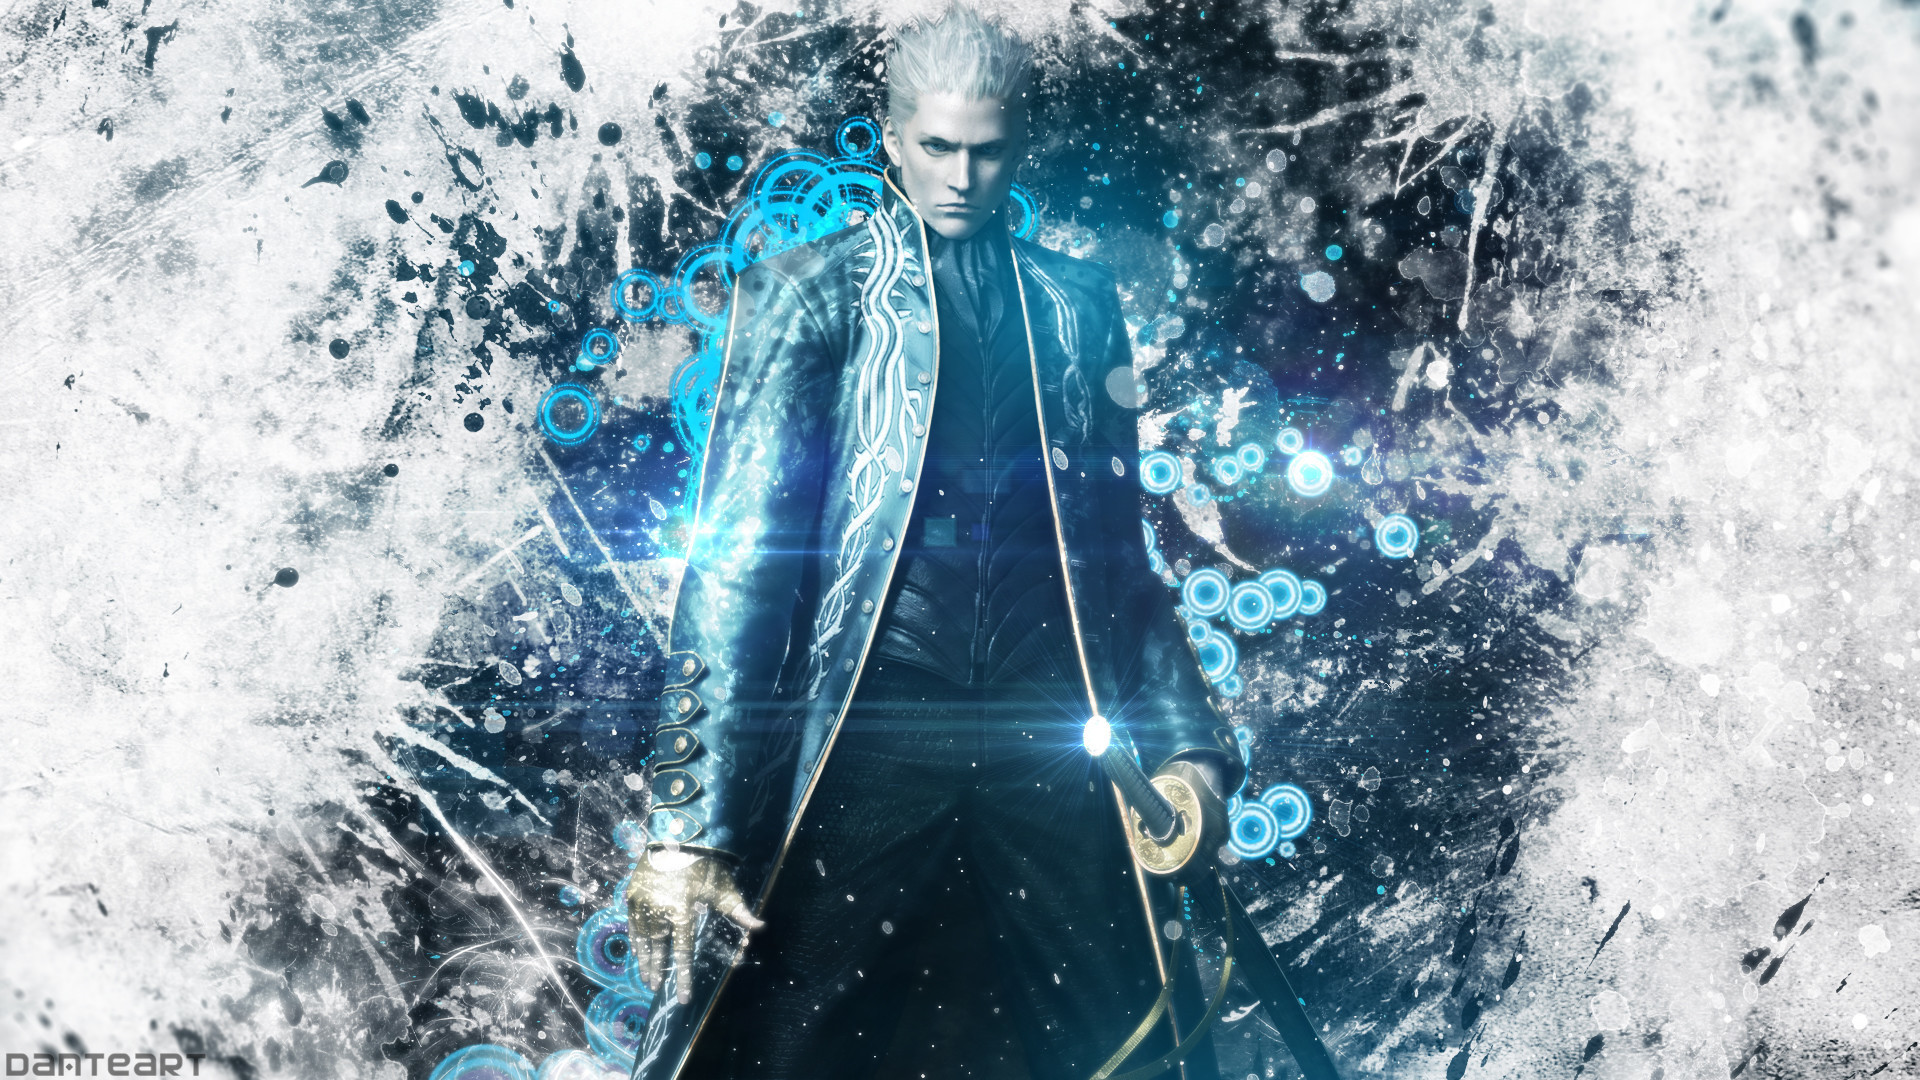 1920x1080 2560x1600 ... download Vergil (Devil May Cry) image